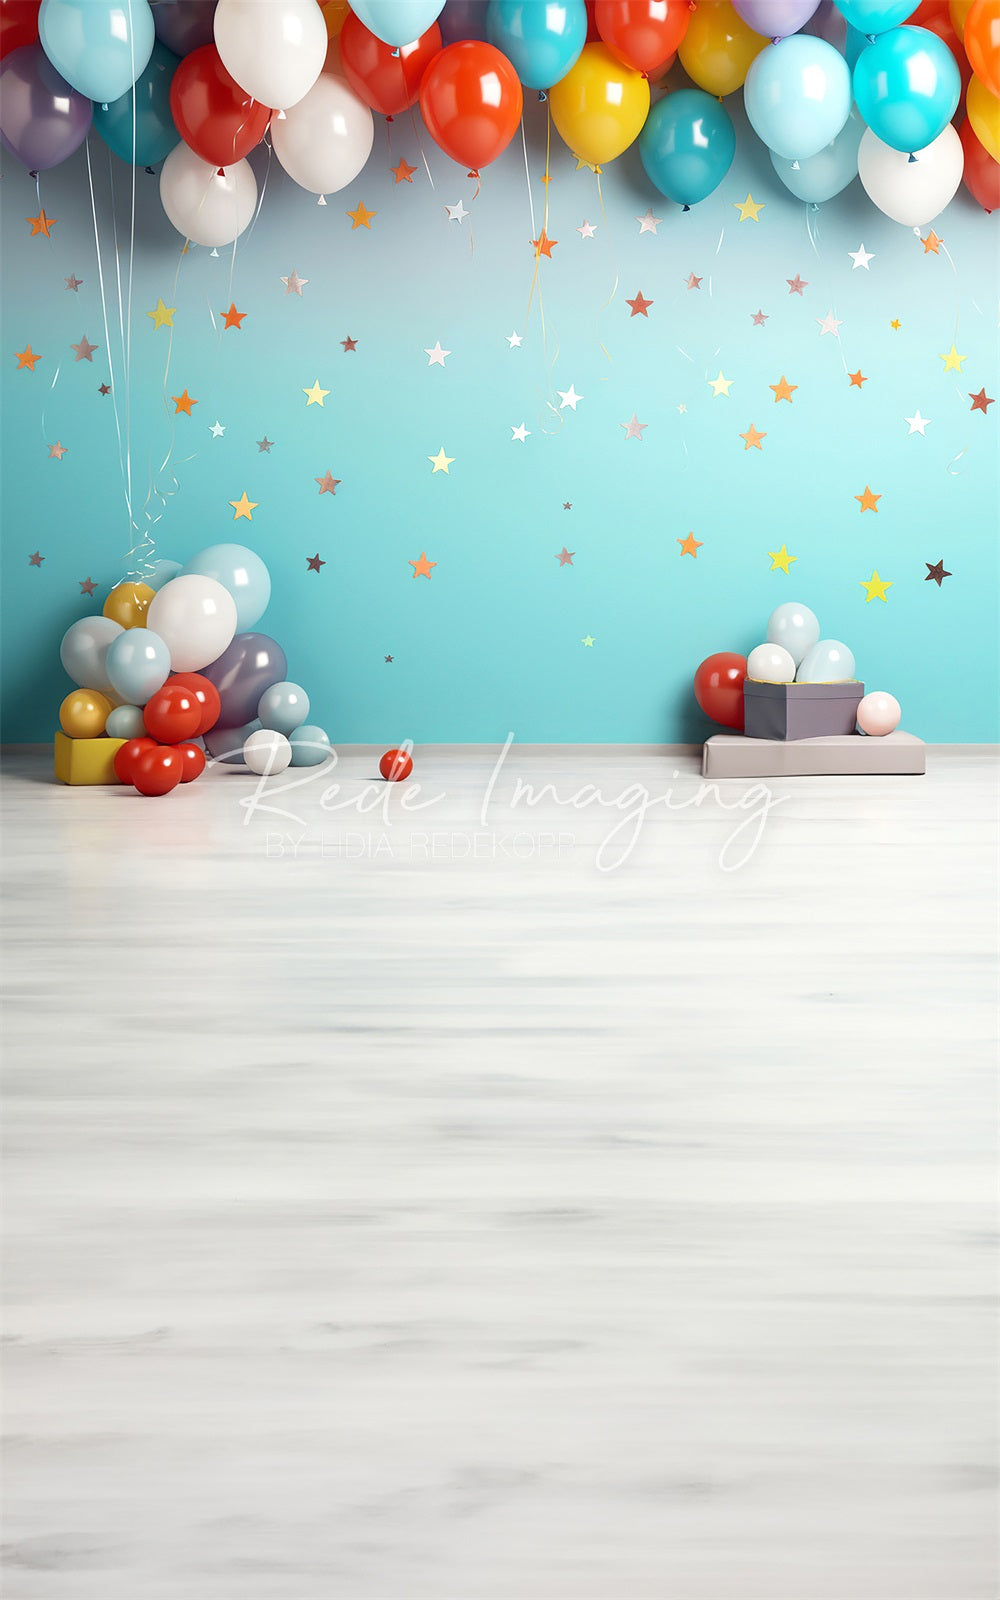 Kate Sweep Cake Smash Birthday Gift Colorful Balloon Star White and Blue Gradient Wall Backdrop Designed by Lidia Redekopp